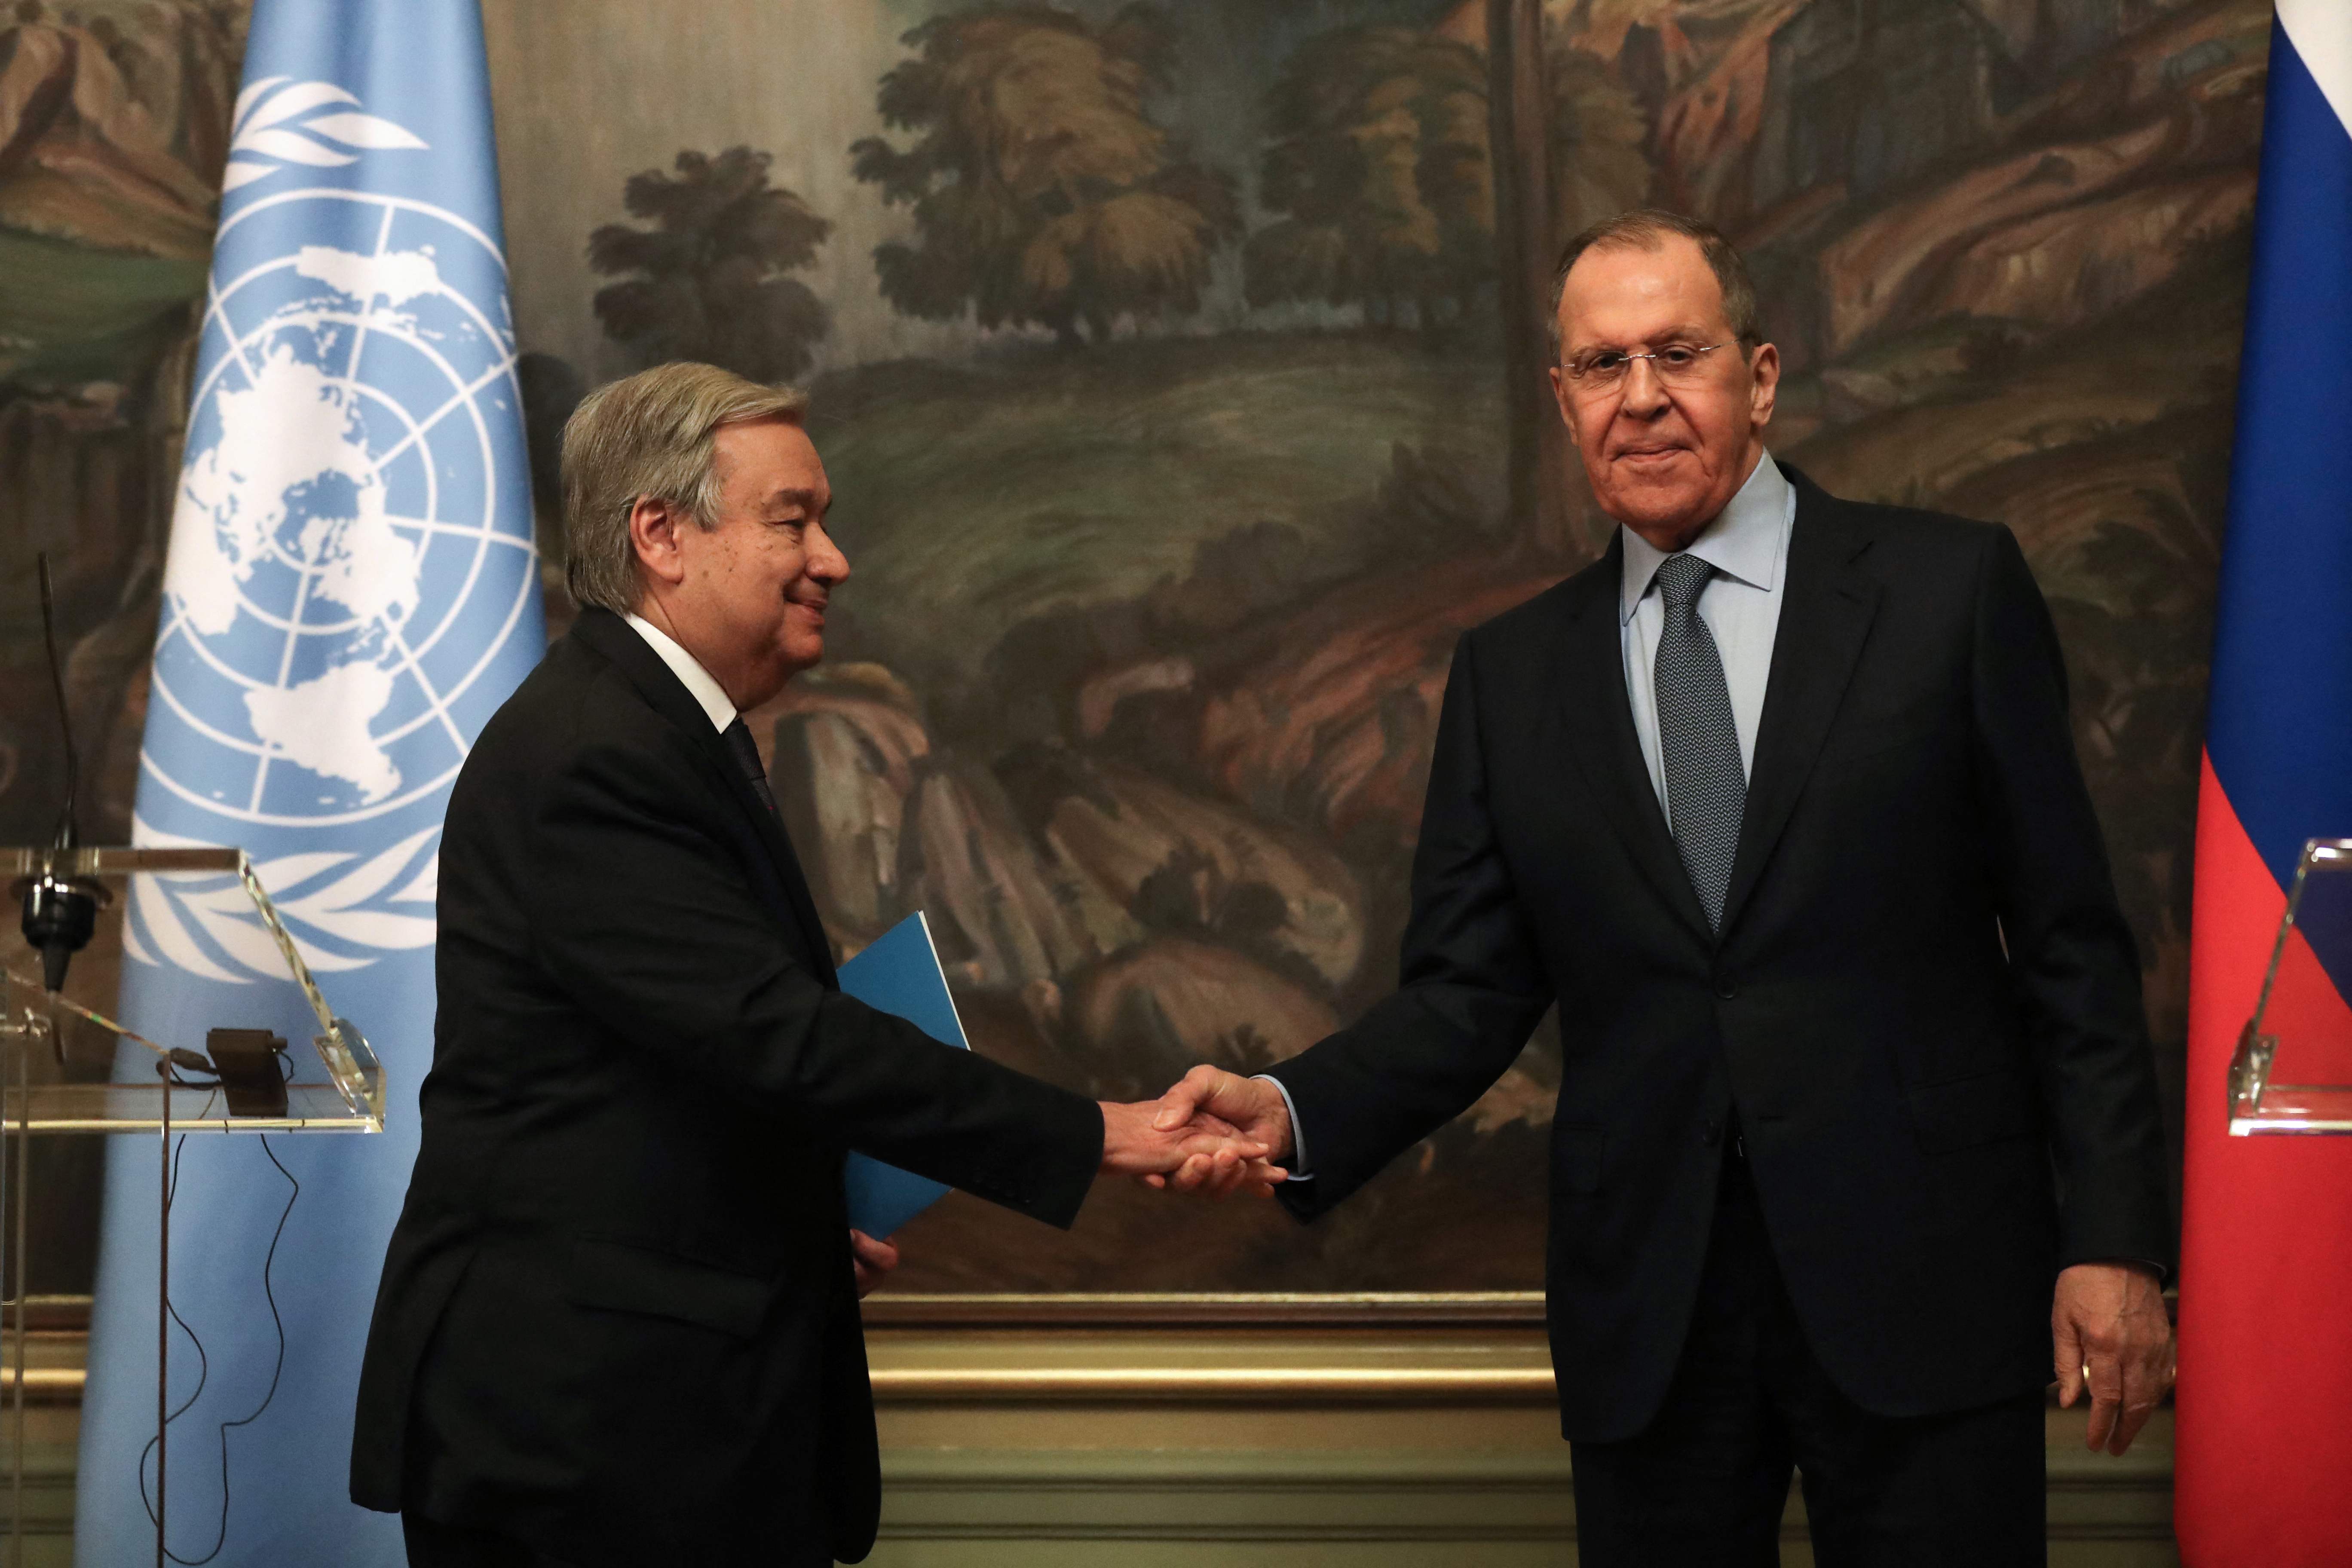 Russian foreign minister Sergei Lavrov and UN secretary-general Antonio Guterres hold a joint press conference following their talks in Moscow